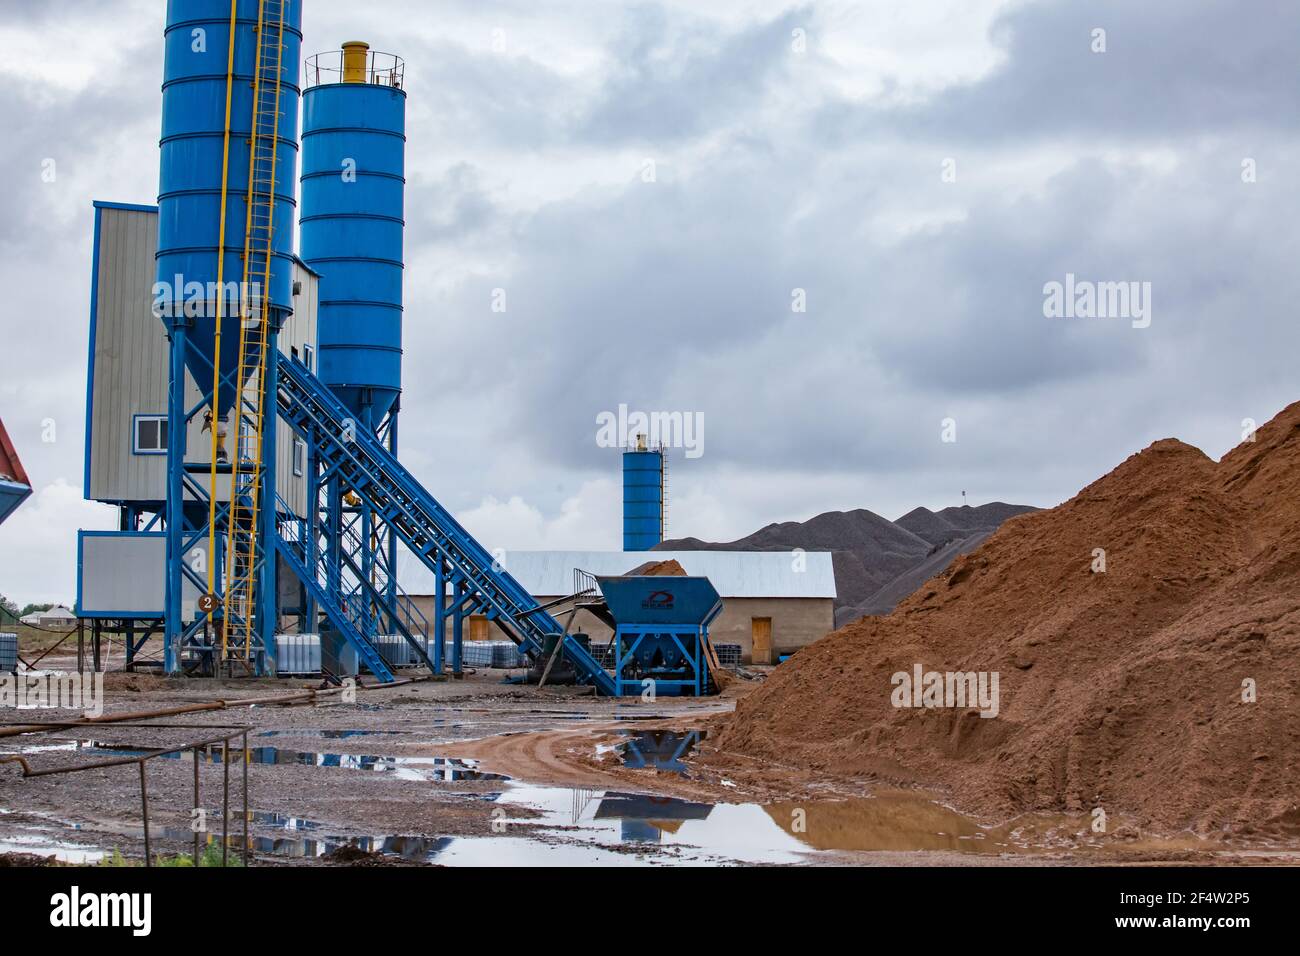 Asphalt mixing plant after the rain on cloudy grey sky background. Stock Photo